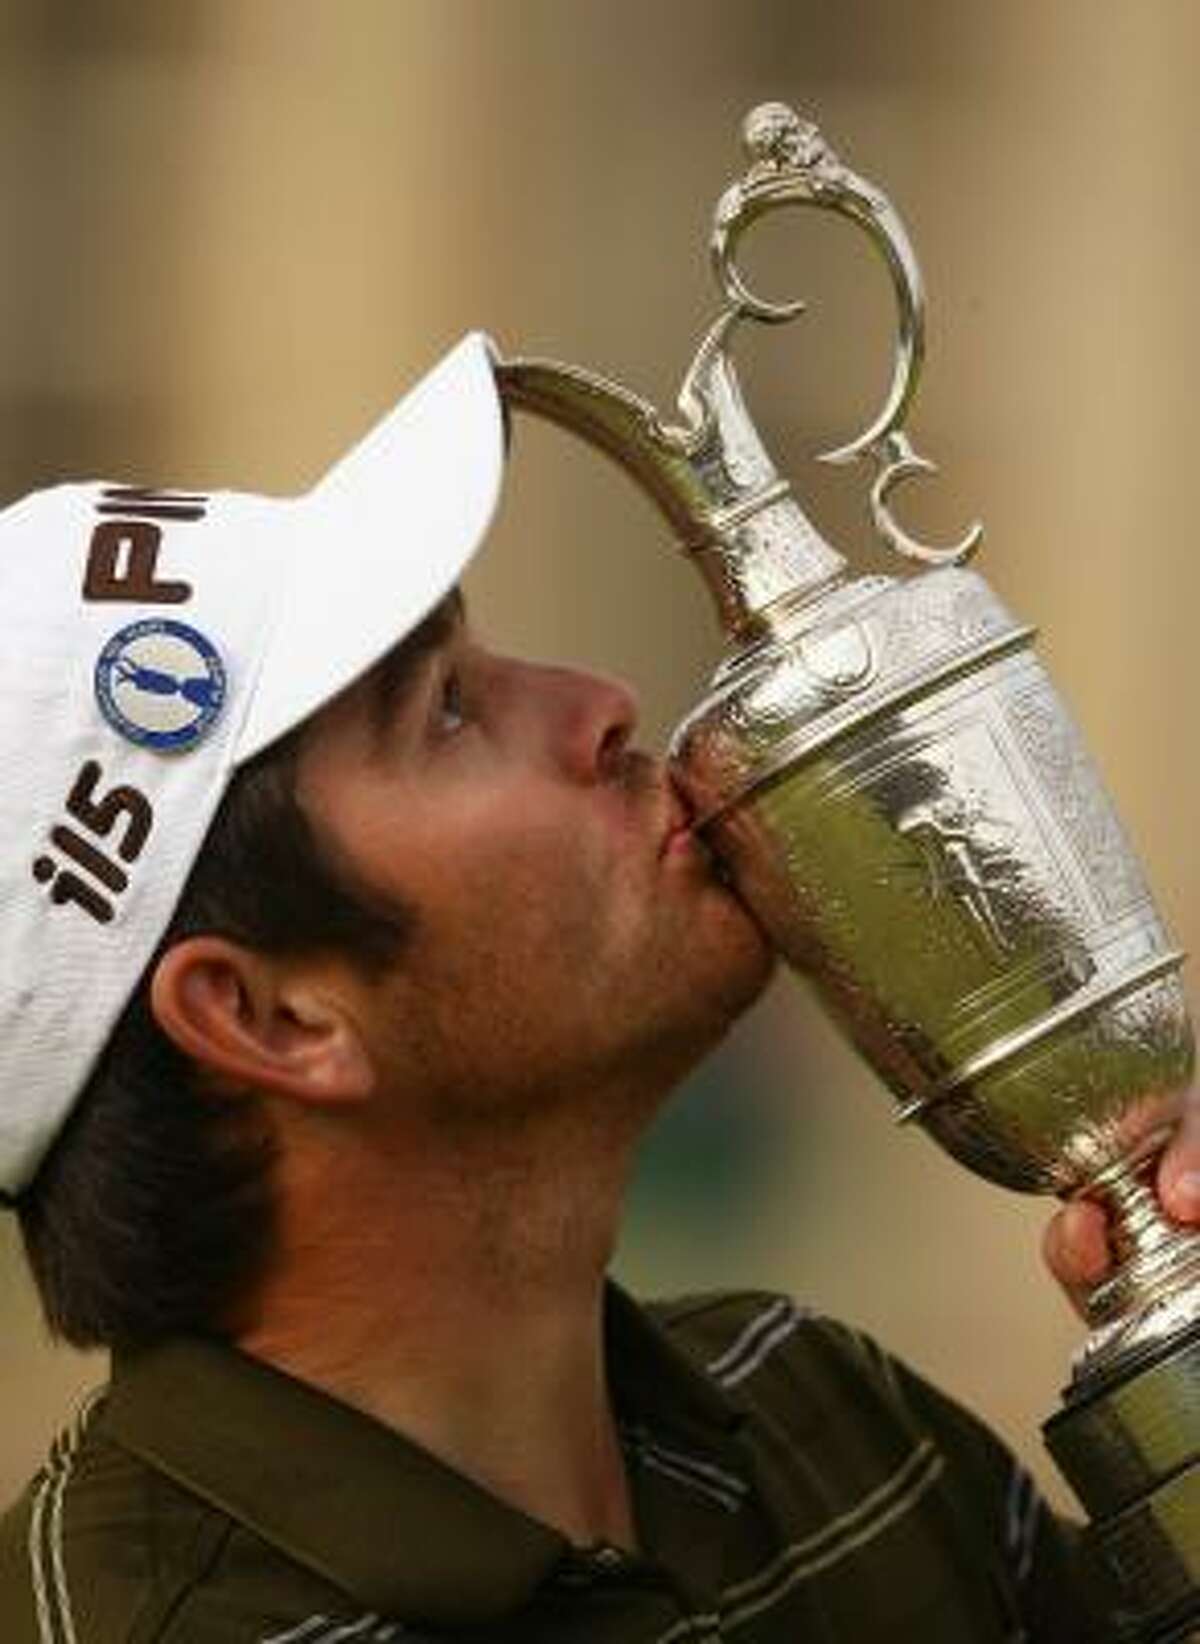 Louis Oosthuizen kisses the Claret Jug, given to the winner of the Open Championship.